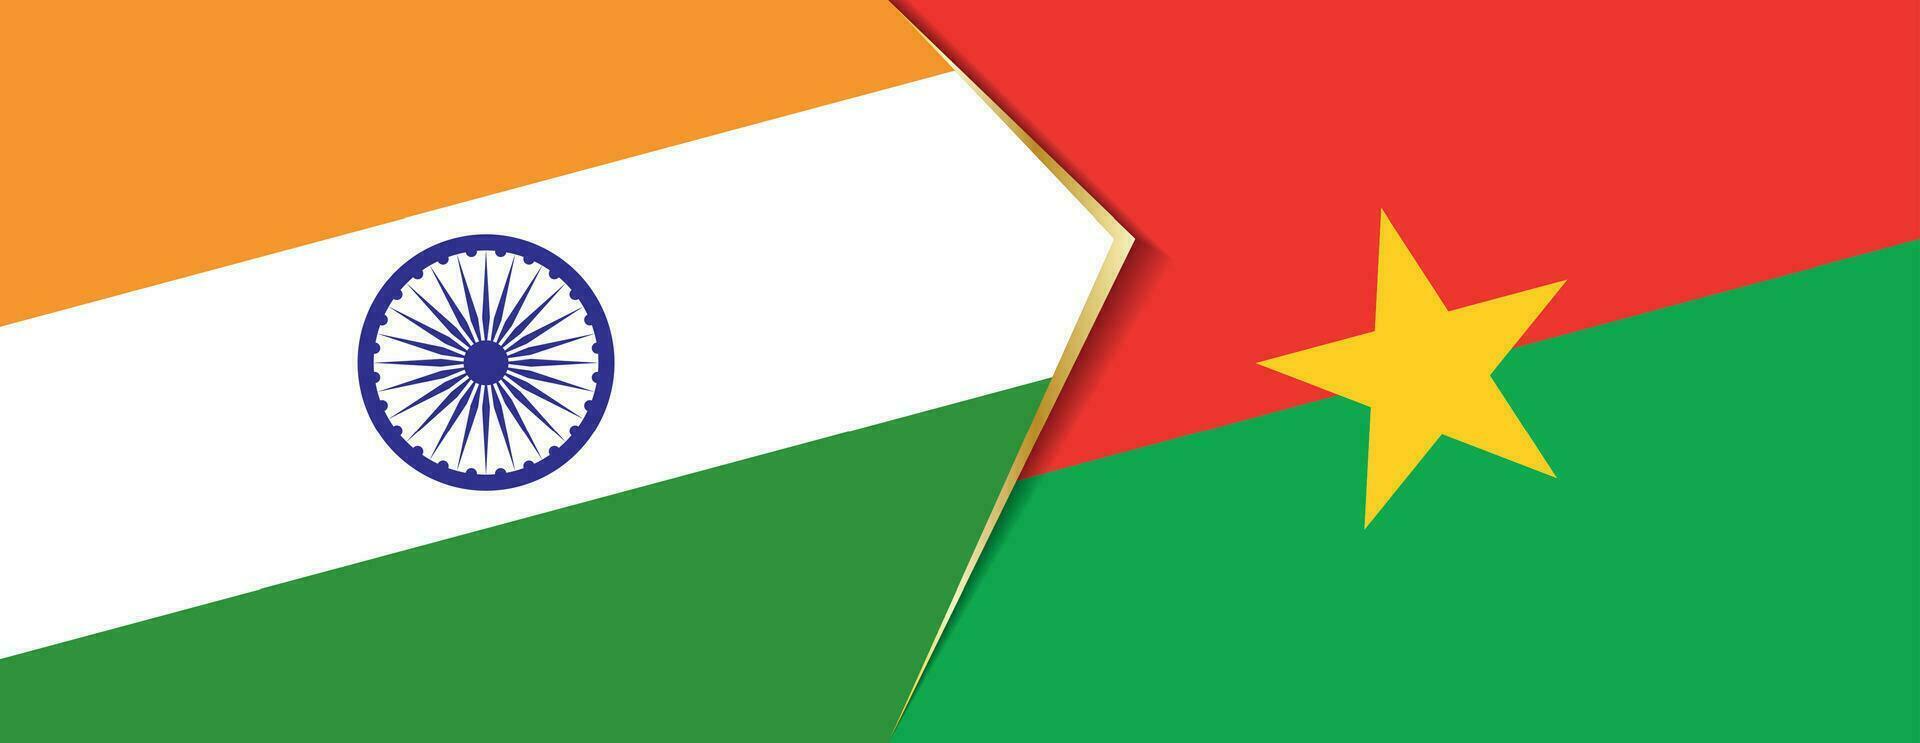 India and Burkina Faso flags, two vector flags.